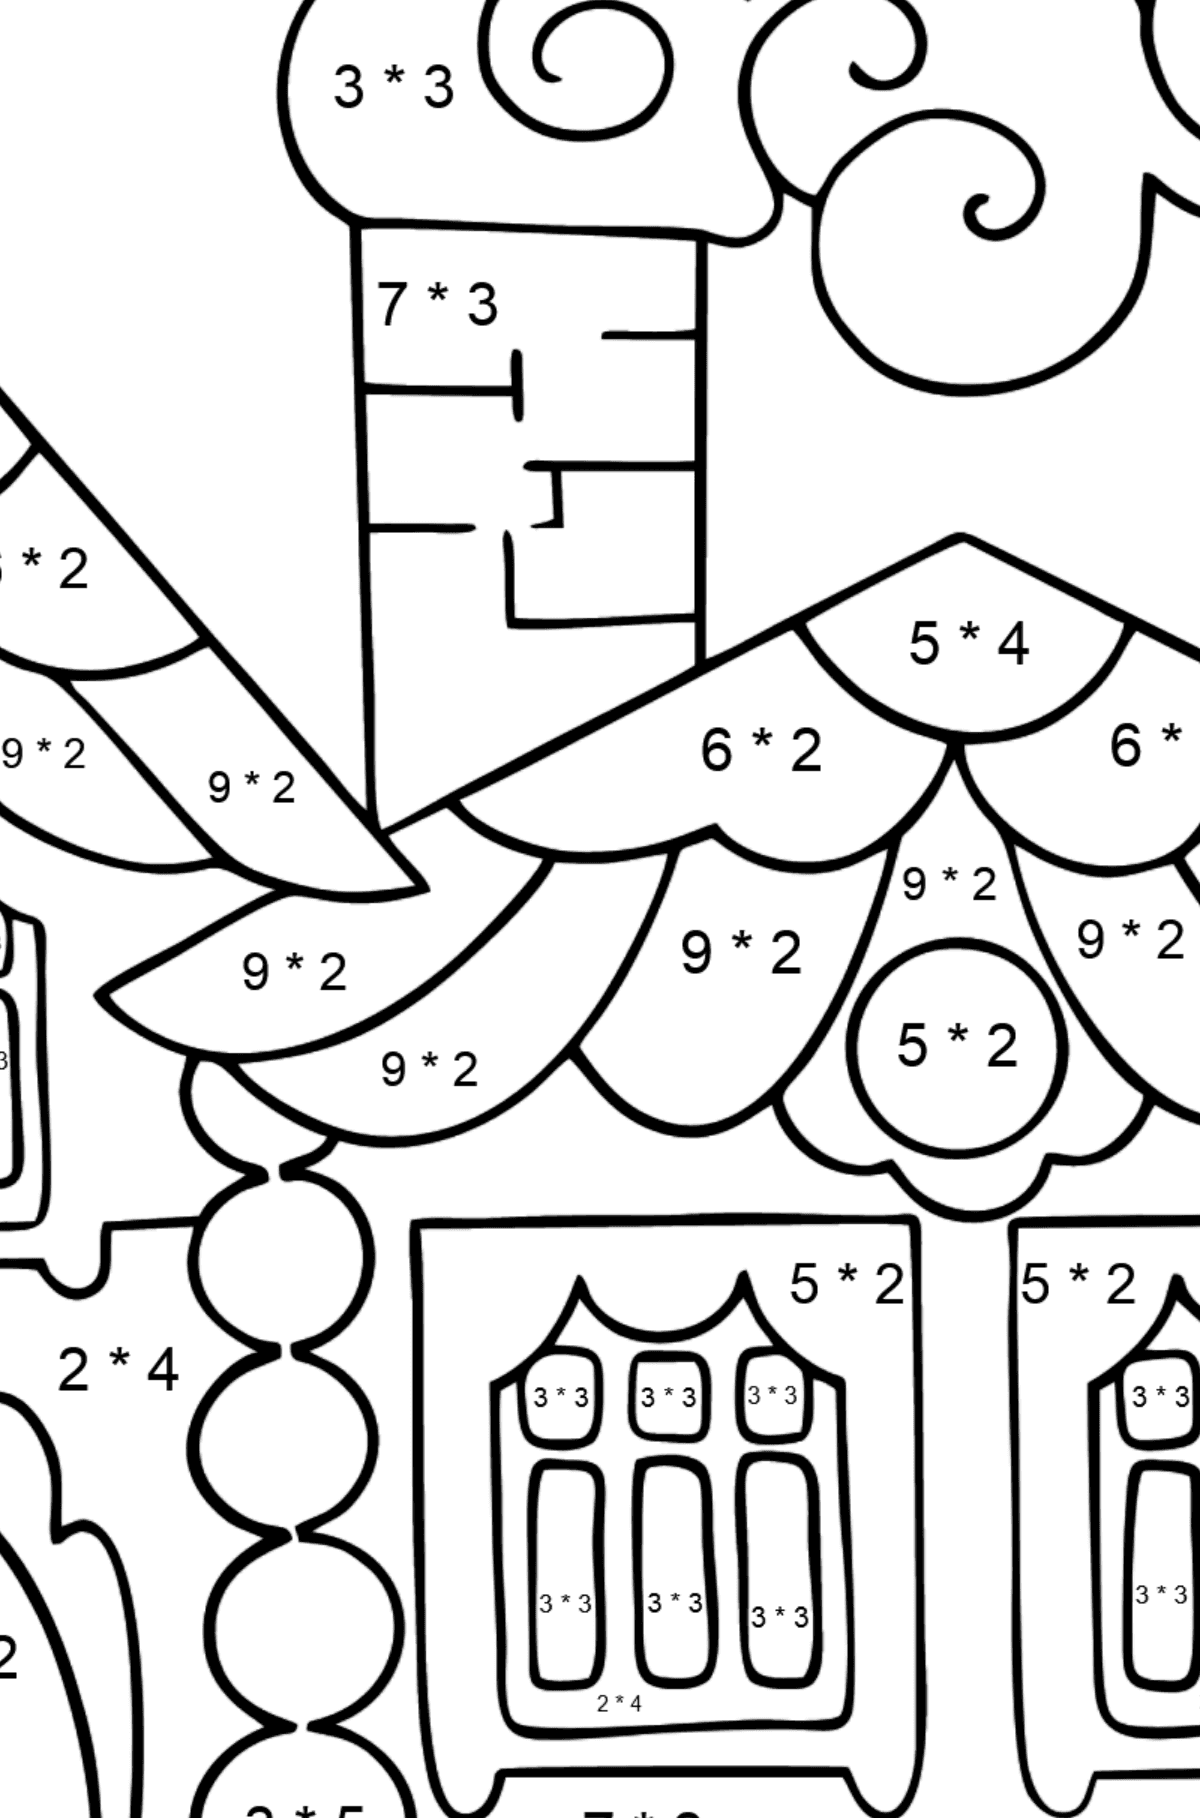 House in the Forest Coloring Page (difficult) - Math Coloring - Multiplication for Kids